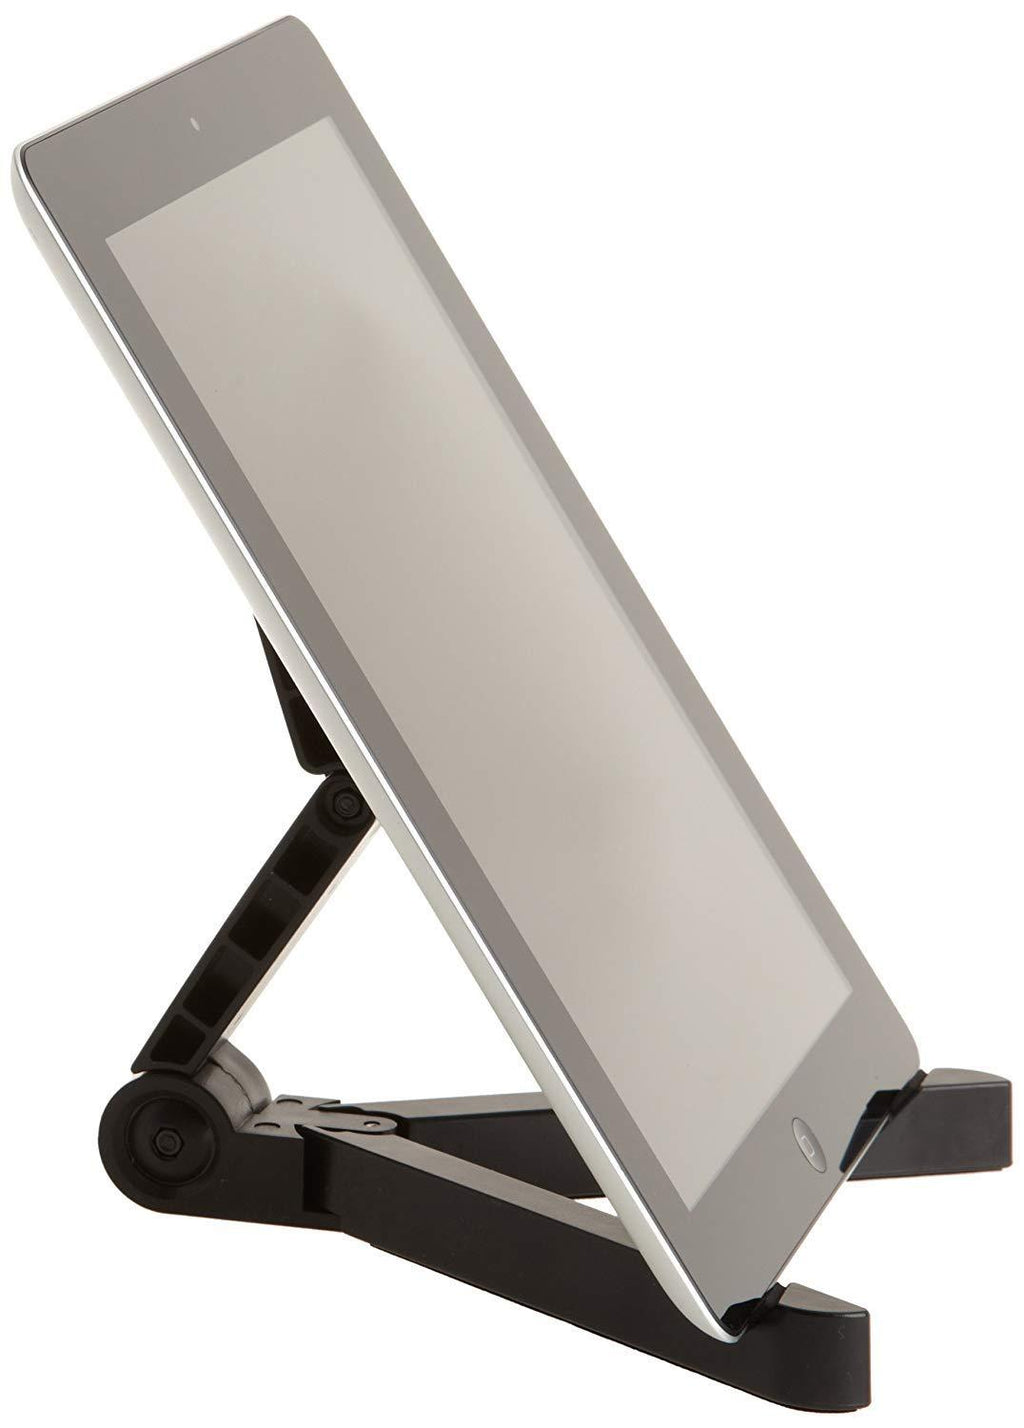  [AUSTRALIA] - Amazon Basics Adjustable Tablet Holder Stand - Compatible with Apple iPad, Samsung Galaxy and Kindle Fire Tablets